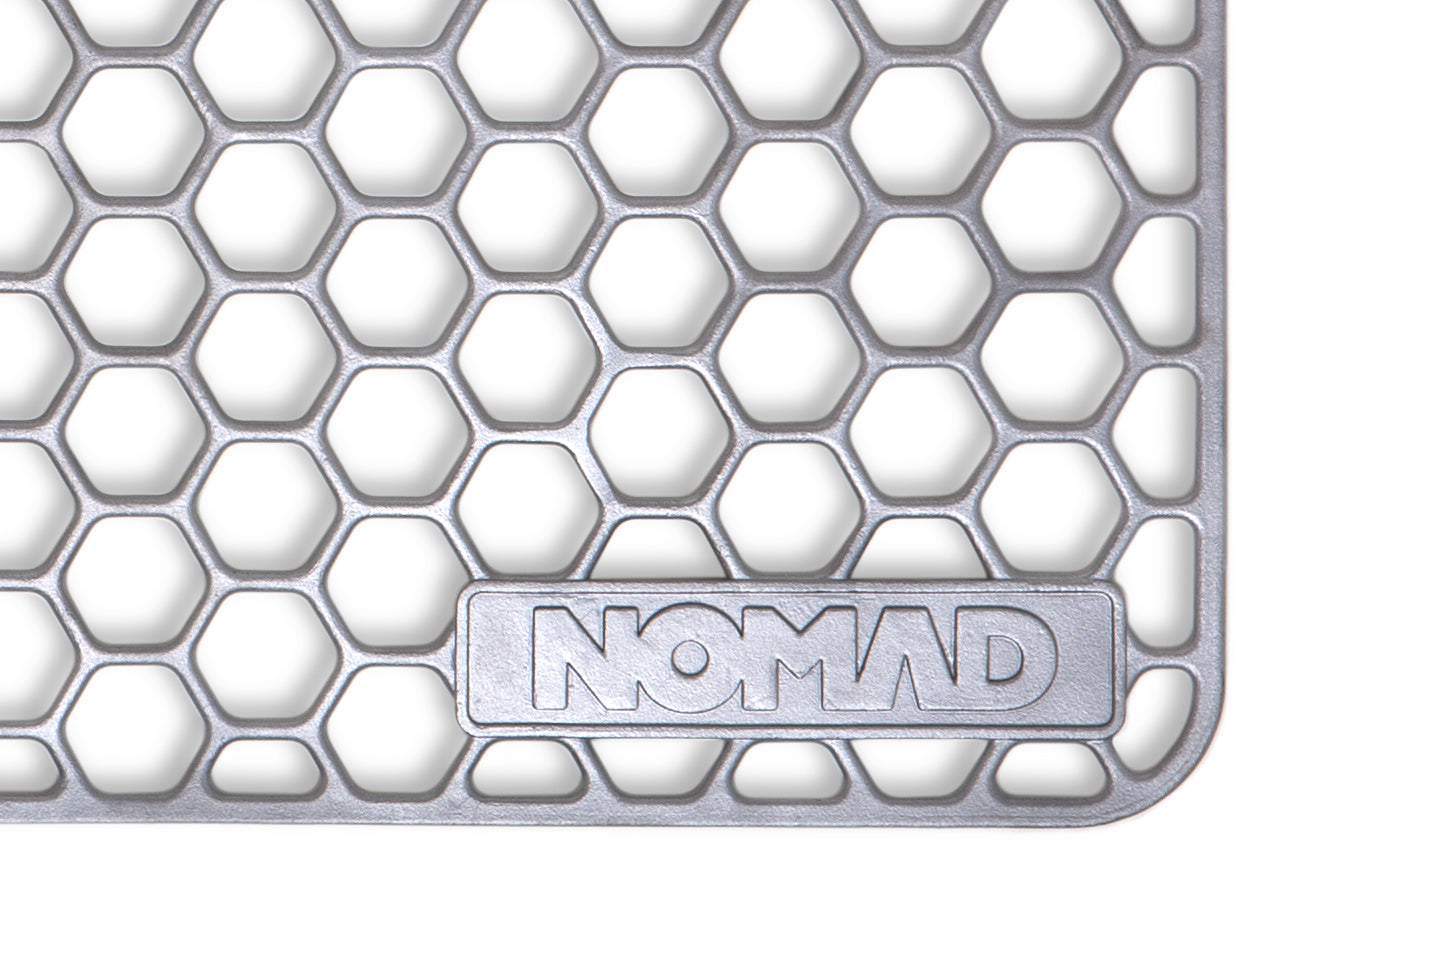 Stainless Steel Grill grate for UDS